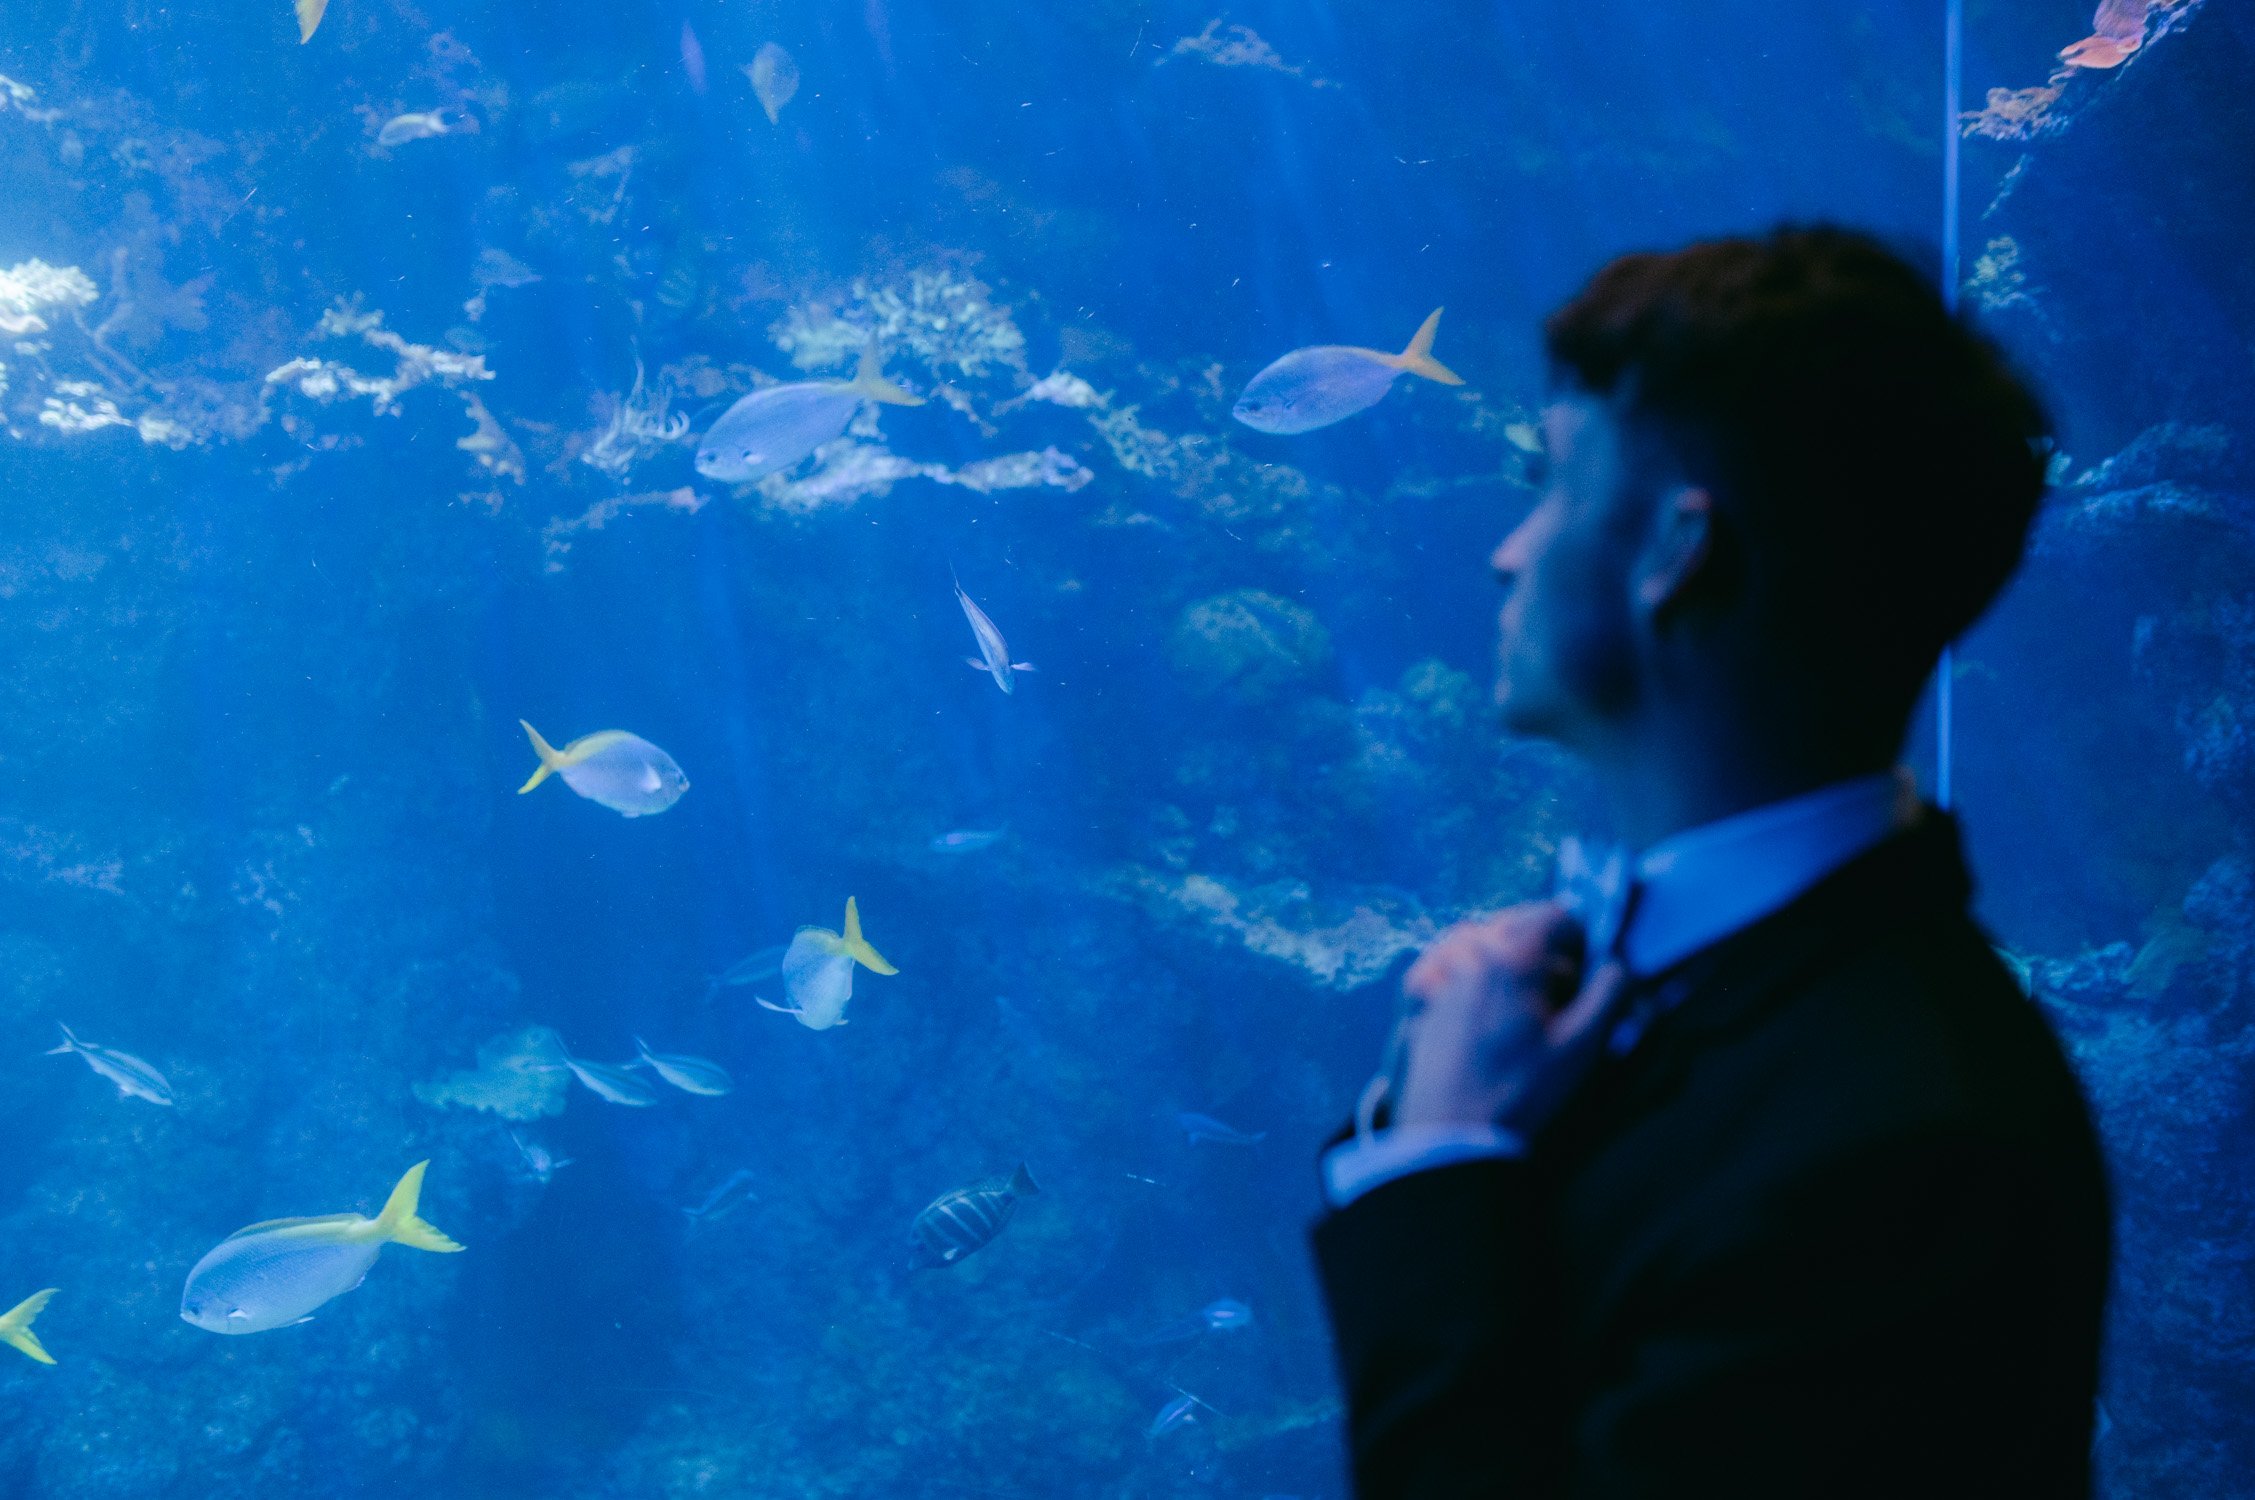 California academy of Sciences in San Francisco Wedding, photo of the groom fixing his tie while looking at the bog aquarium with fishes